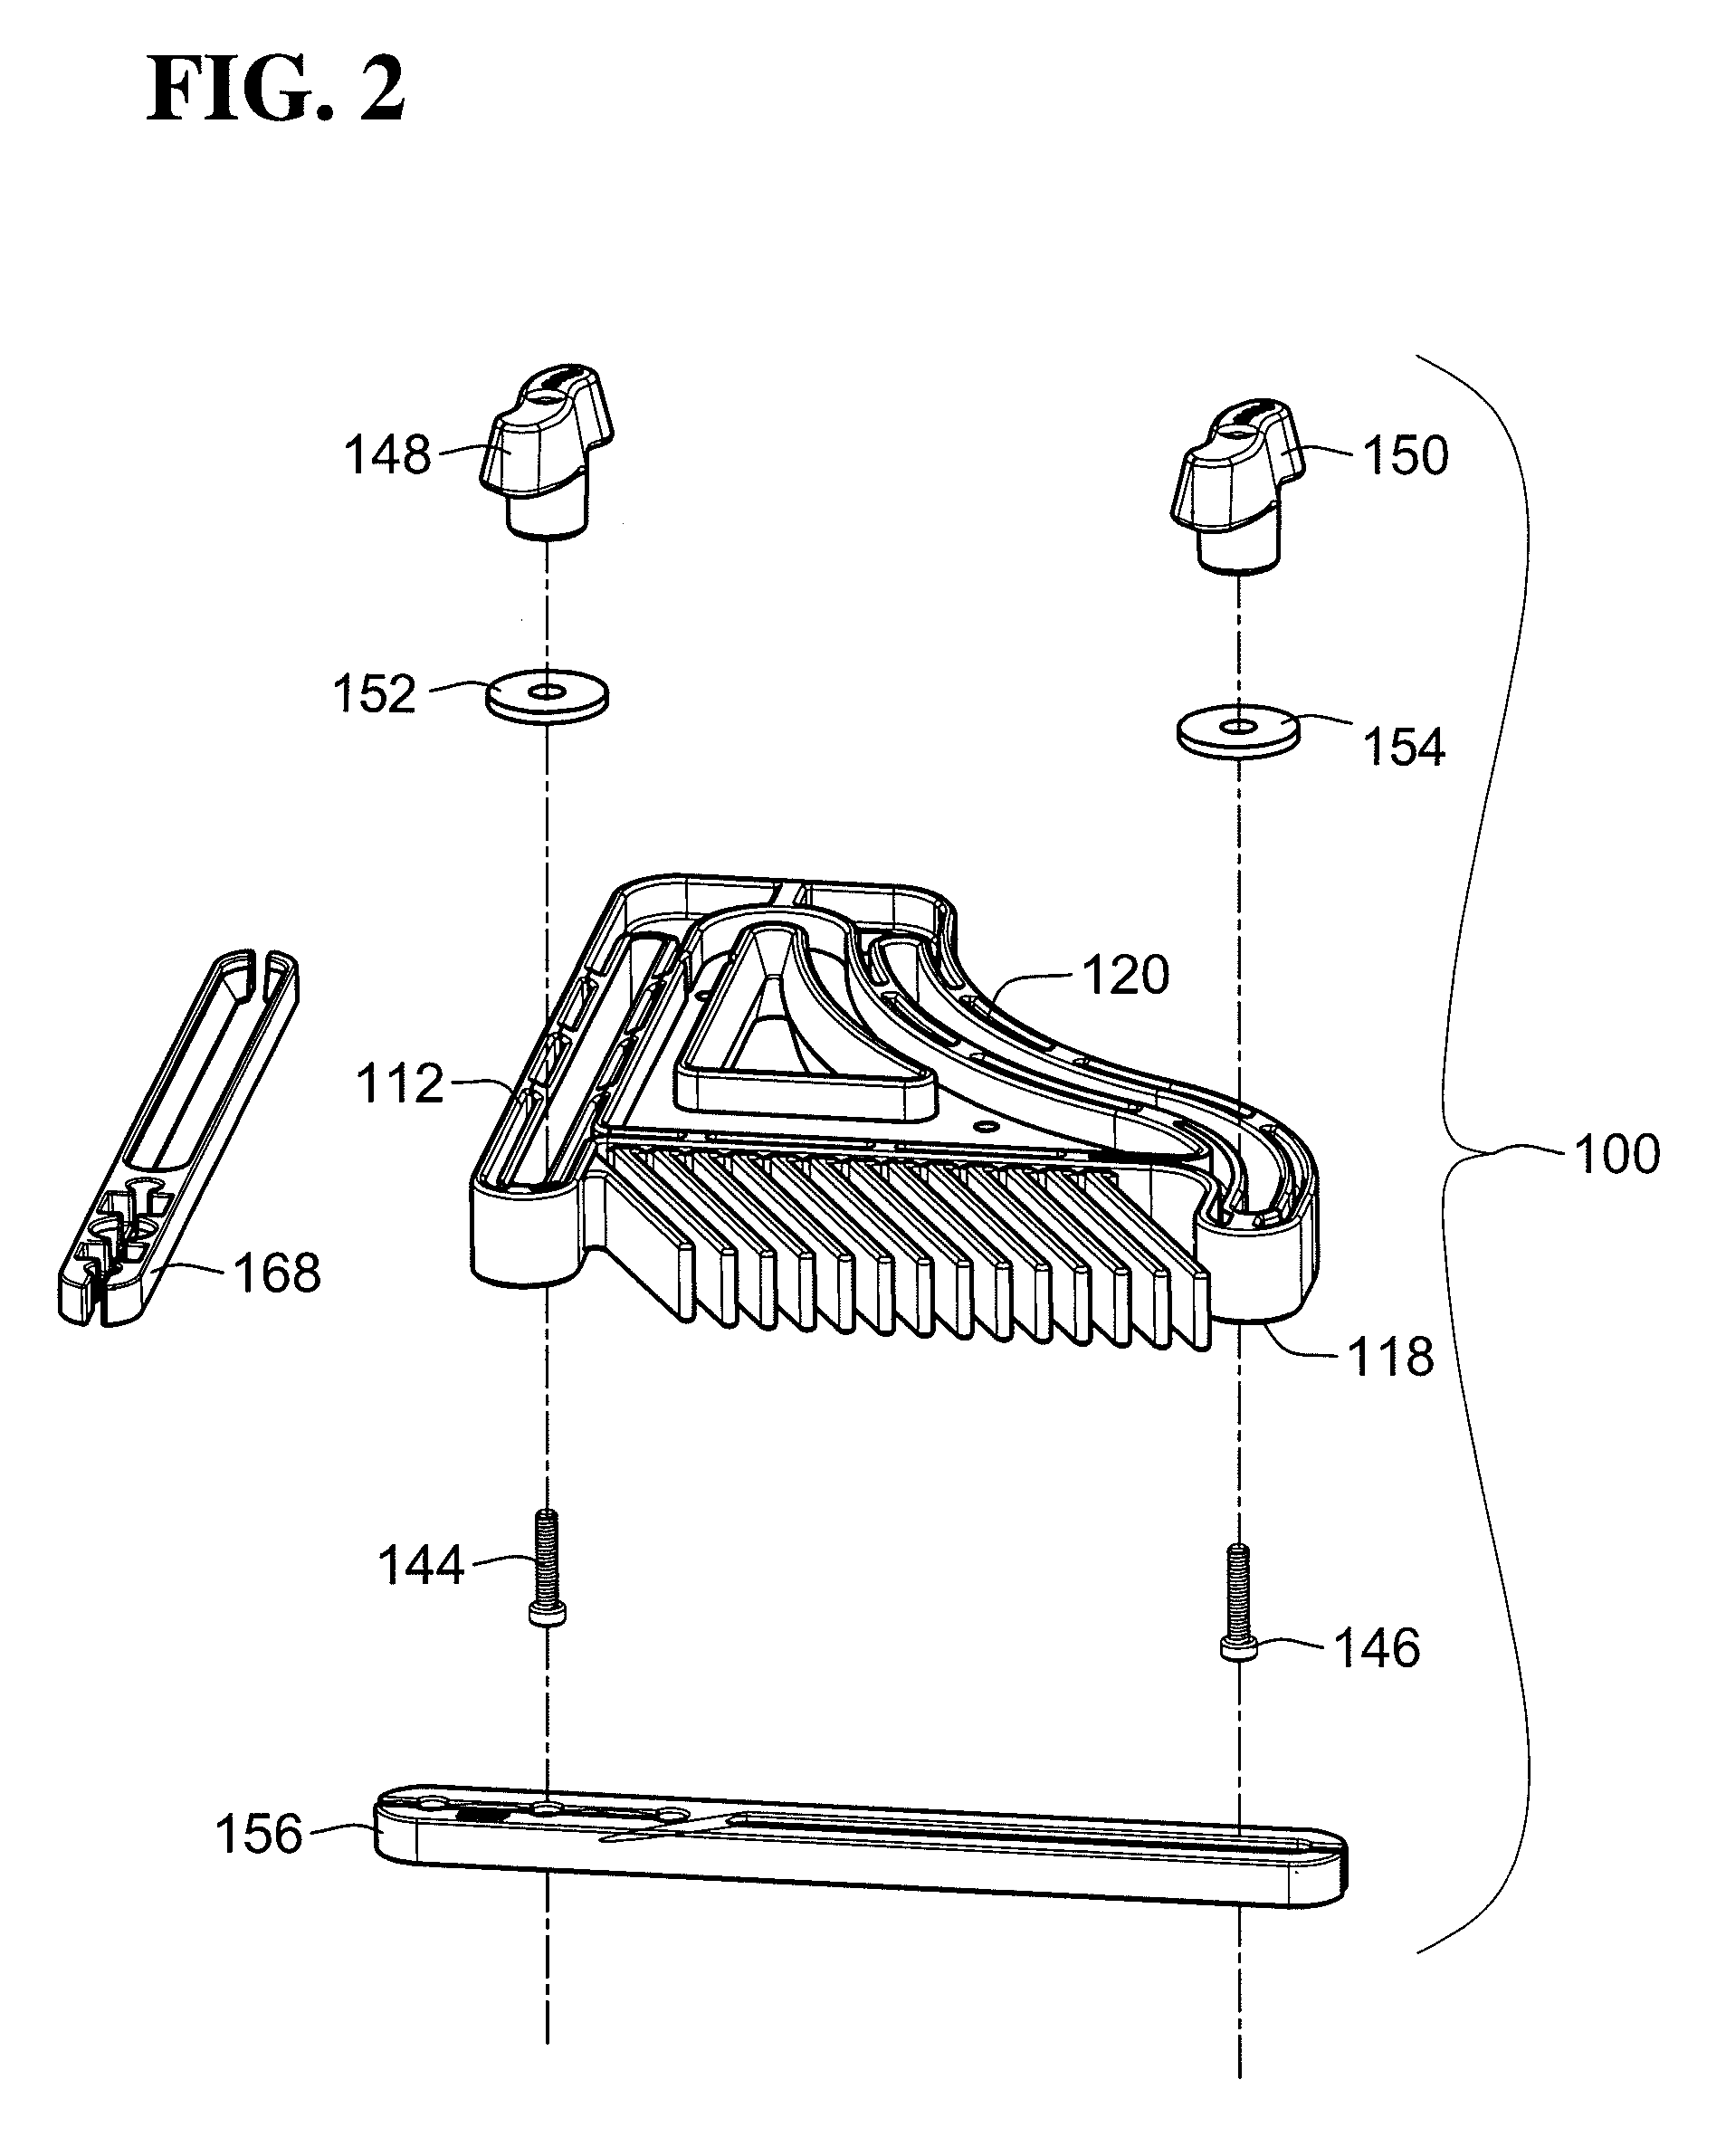 Feather board apparatus and method